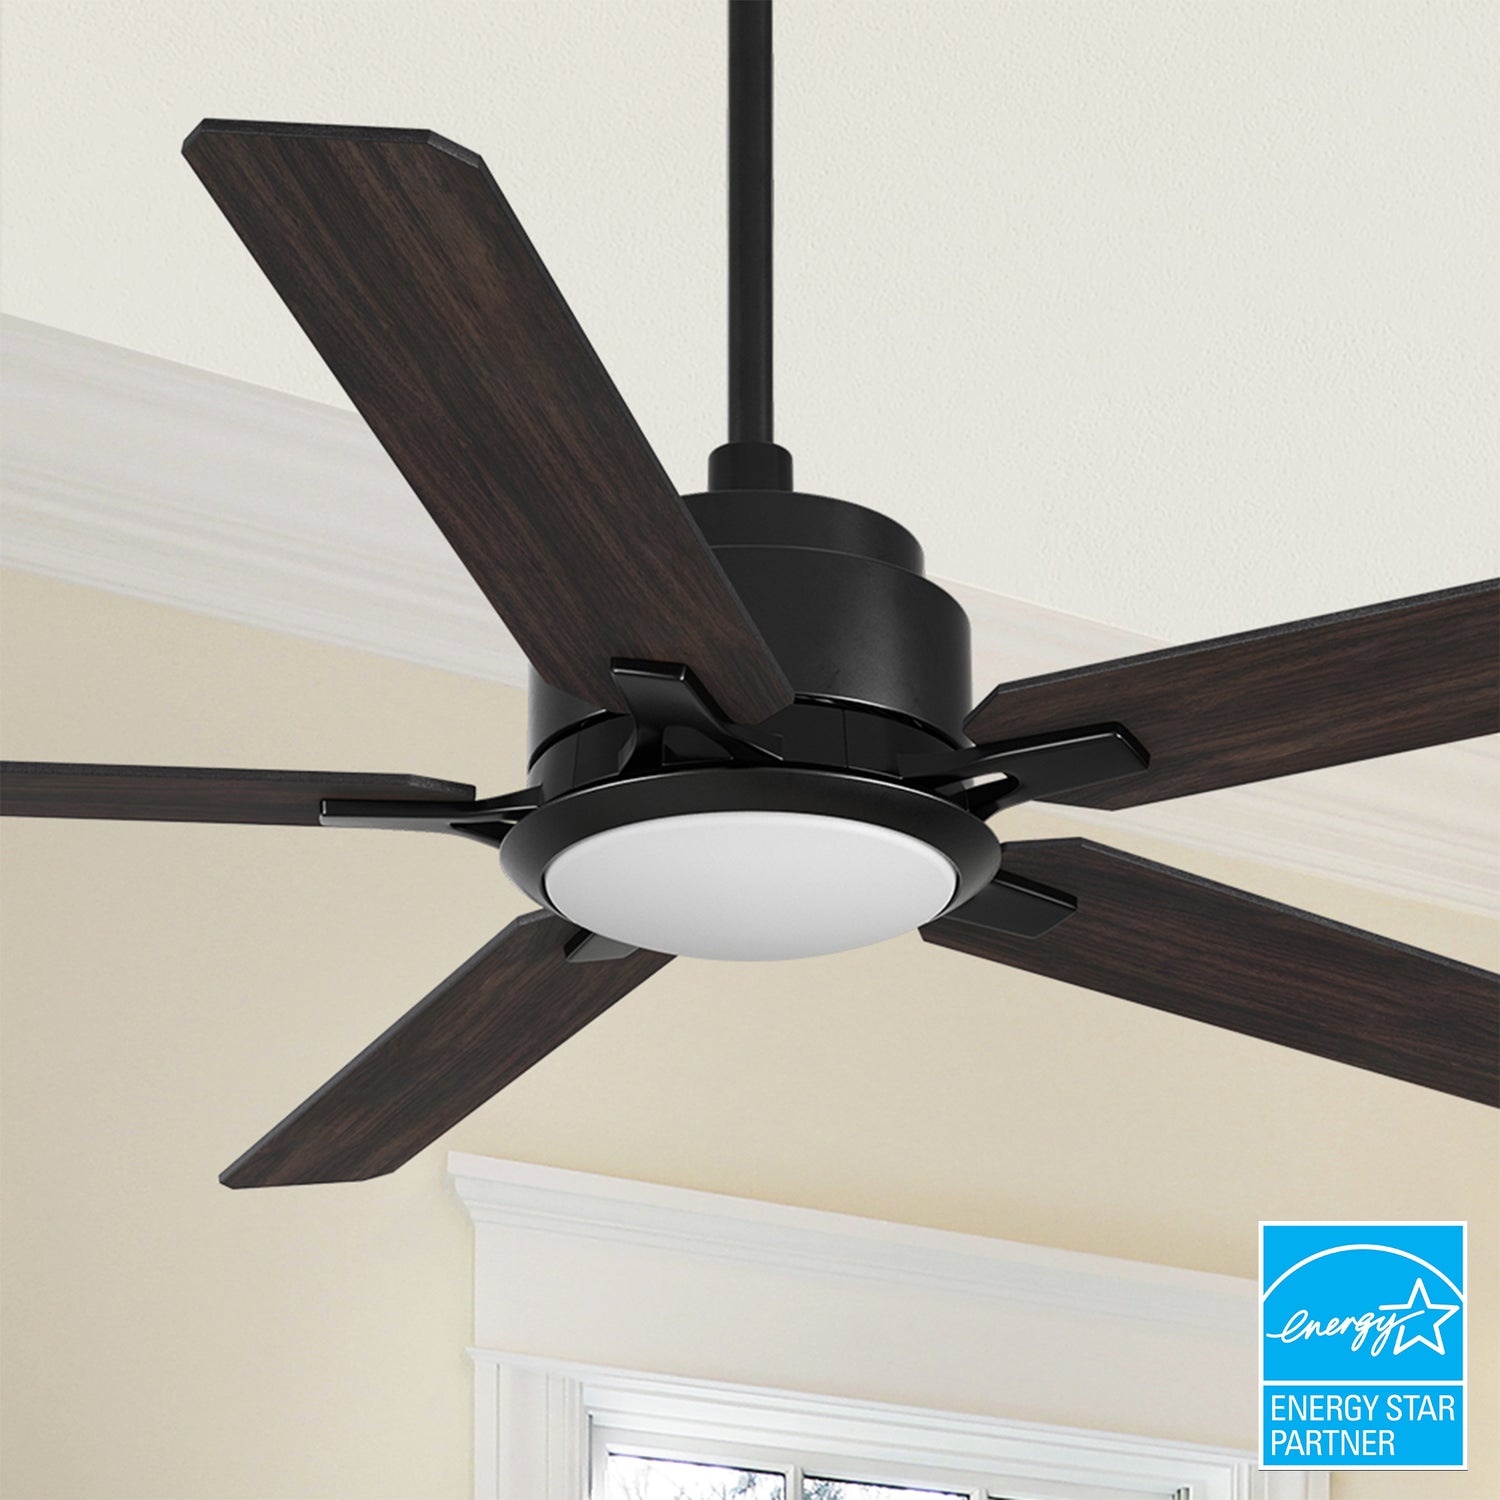 Smafan Essex 52 inch smart ceiling fan designs with black finish, elegant plywood blades and an integrated 4000K LED daylight. 